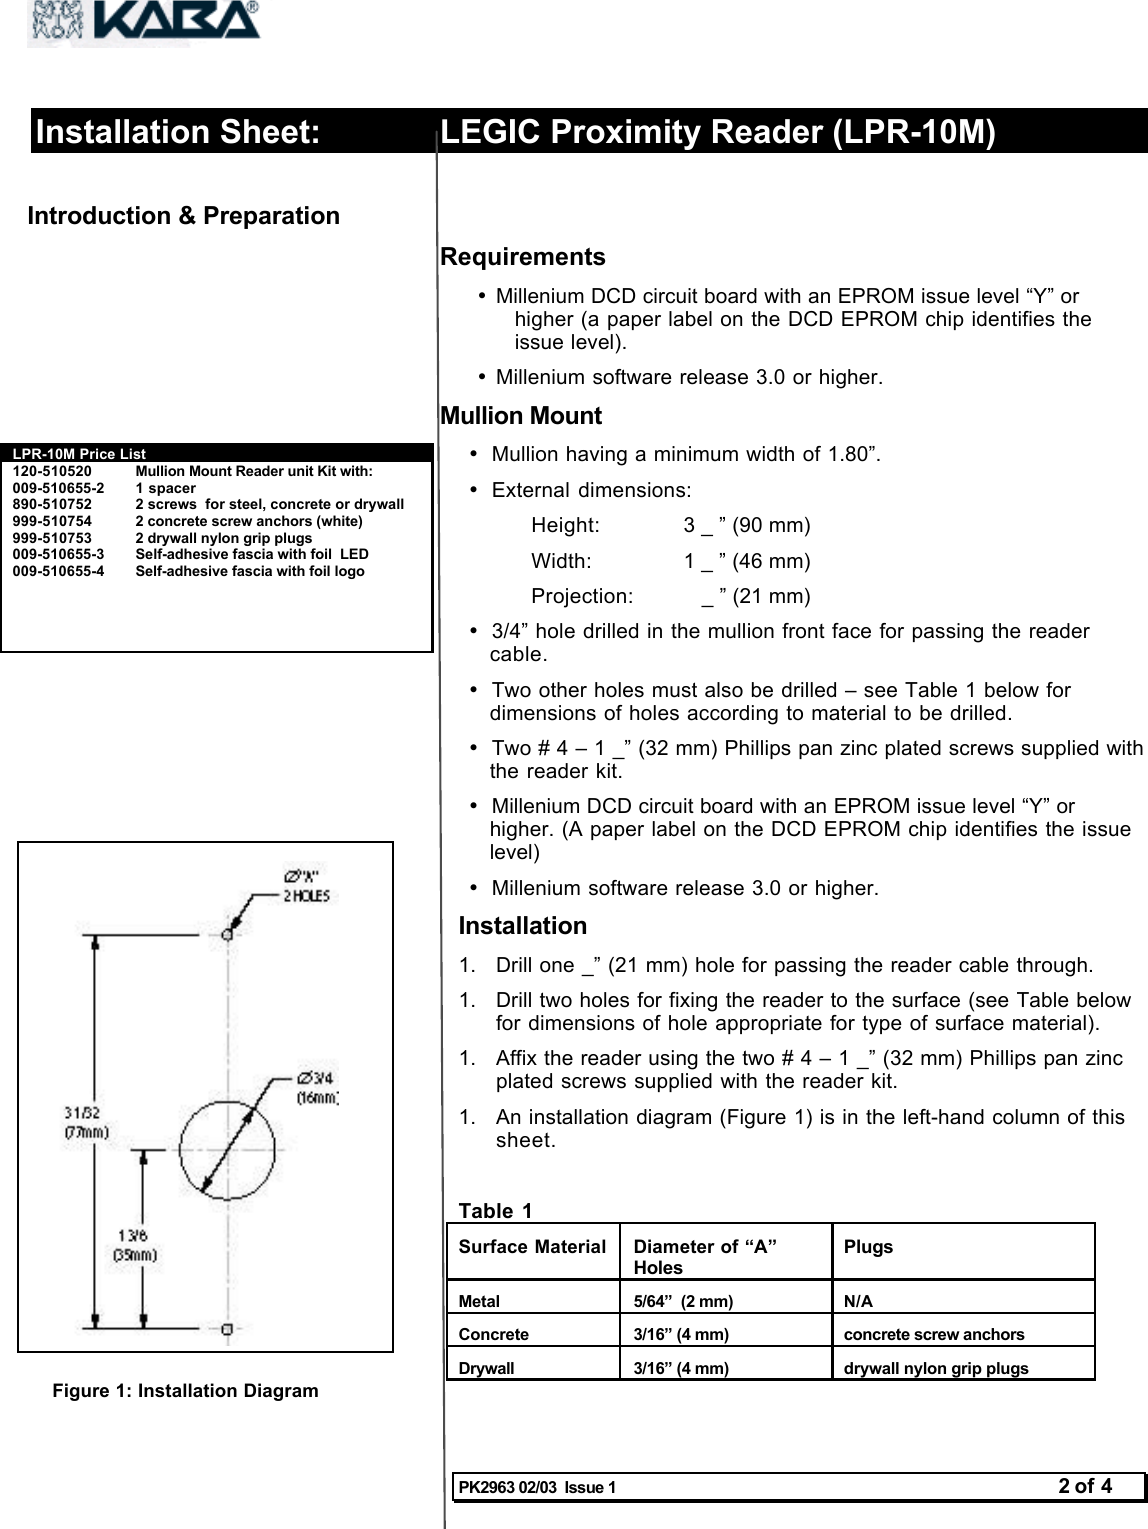 PK2963 02/03  Issue 1 2 of 4Installation Sheet: LEGIC Proximity Reader (LPR-10M)Introduction &amp; Preparation Requirements• Millenium DCD circuit board with an EPROM issue level “Y” orhigher (a paper label on the DCD EPROM chip identifies theissue level).• Millenium software release 3.0 or higher.Mullion Mount• Mullion having a minimum width of 1.80”.• External dimensions:Height: 3 _ ” (90 mm)Width: 1 _ ” (46 mm)Projection:    _ ” (21 mm)• 3/4” hole drilled in the mullion front face for passing the readercable.• Two other holes must also be drilled – see Table 1 below fordimensions of holes according to material to be drilled.• Two # 4 – 1 _” (32 mm) Phillips pan zinc plated screws supplied withthe reader kit.• Millenium DCD circuit board with an EPROM issue level “Y” orhigher. (A paper label on the DCD EPROM chip identifies the issuelevel)• Millenium software release 3.0 or higher.Installation1.  Drill one _” (21 mm) hole for passing the reader cable through.1.  Drill two holes for fixing the reader to the surface (see Table belowfor dimensions of hole appropriate for type of surface material).1.  Affix the reader using the two # 4 – 1 _” (32 mm) Phillips pan zincplated screws supplied with the reader kit.1.  An installation diagram (Figure 1) is in the left-hand column of thissheet.Table 1Surface MaterialDiameter of “A”HolesPlugsMetal5/64”  (2 mm)N/AConcrete3/16” (4 mm)concrete screw anchorsDrywall3/16” (4 mm)drywall nylon grip plugsLPR-10M Price List120-510520 Mullion Mount Reader unit Kit with:009-510655-2 1 spacer890-510752 2 screws  for steel, concrete or drywall999-510754 2 concrete screw anchors (white)999-510753 2 drywall nylon grip plugs009-510655-3 Self-adhesive fascia with foil  LED009-510655-4 Self-adhesive fascia with foil logoFigure 1: Installation Diagram